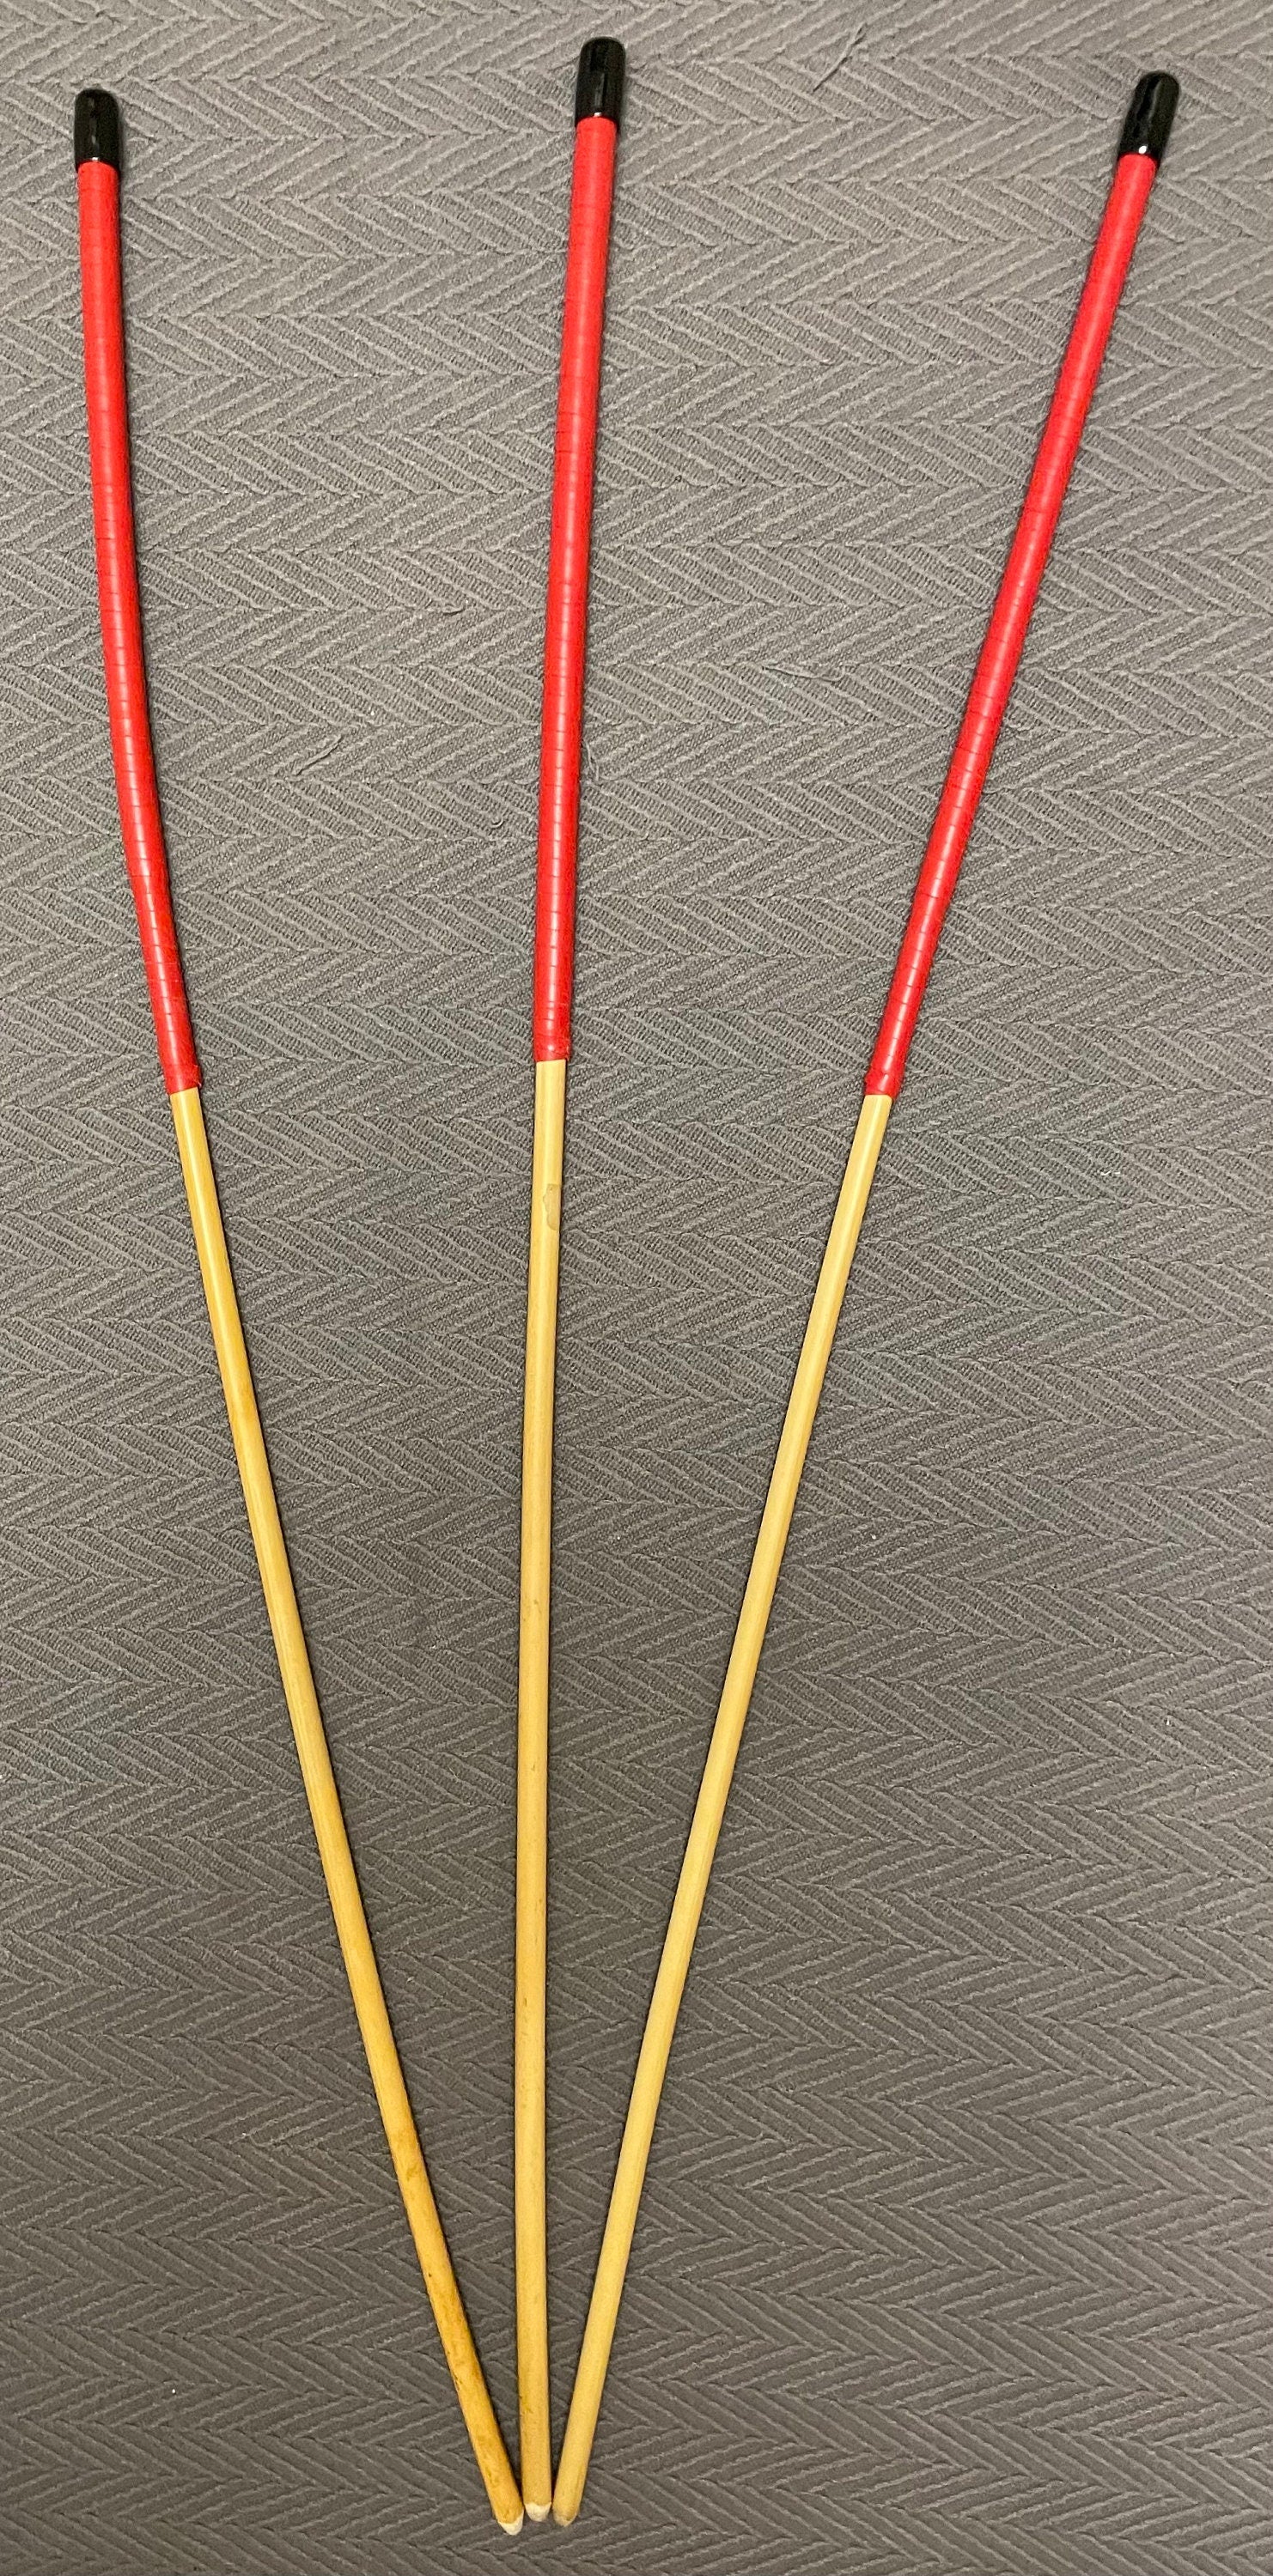 Set of 3 Knotless Dragon Canes / Ultimate Rattan Canes / No Knot Canes with Red Kangaroo Leather Handles